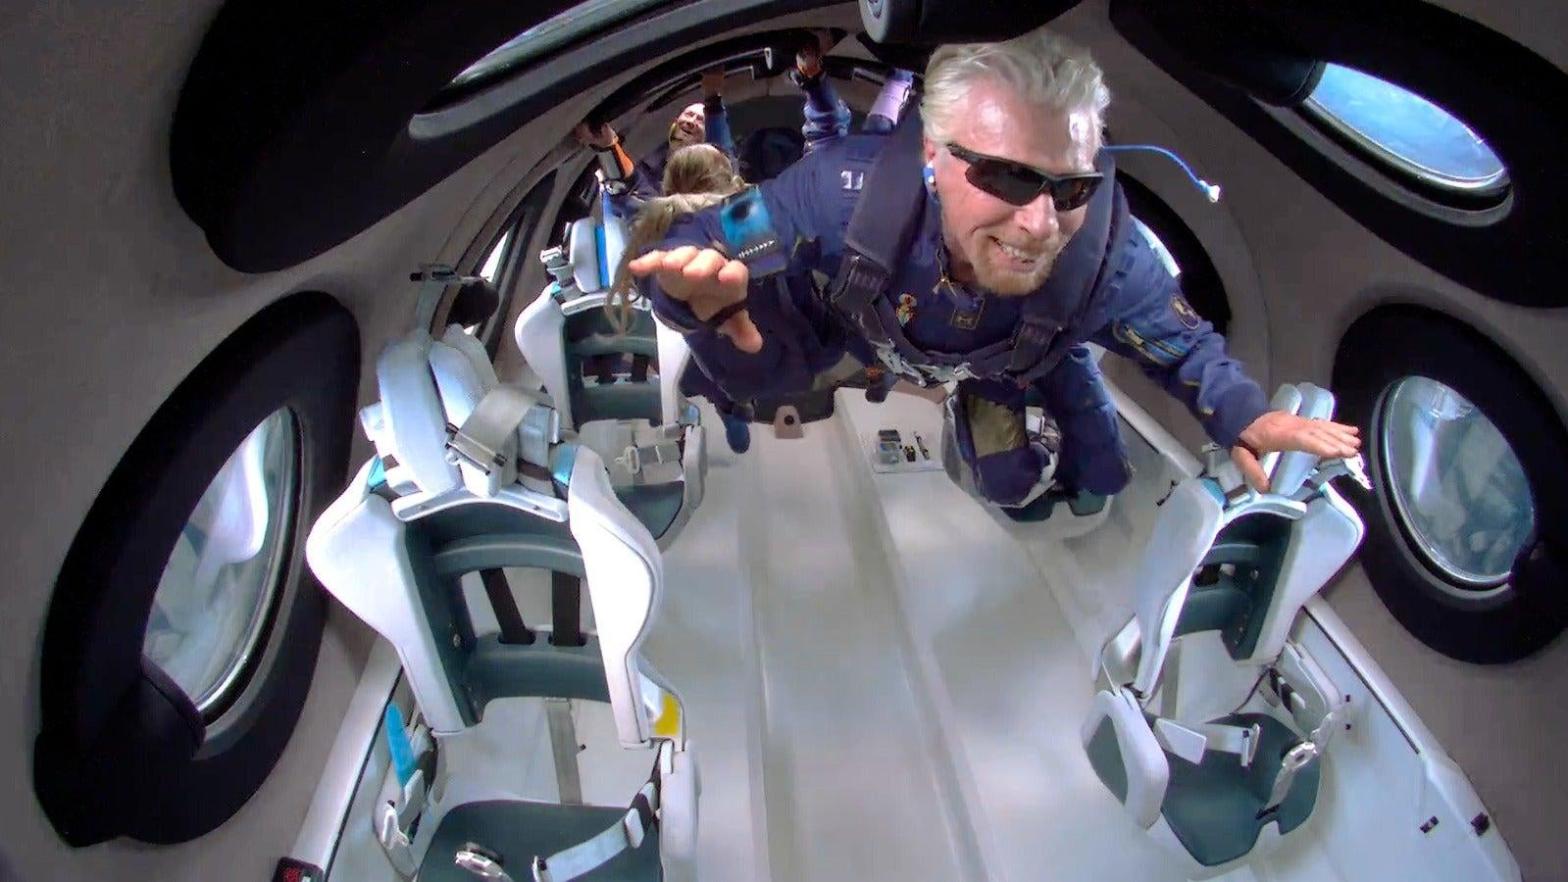 Richard Branson, the 70-year-old founder of Virgin Group and CEO of Virgin Galactic, flew in the Unity22 test flight back in 2021 which was later reported to have flown off course. (Photo: Virgin Galactic)